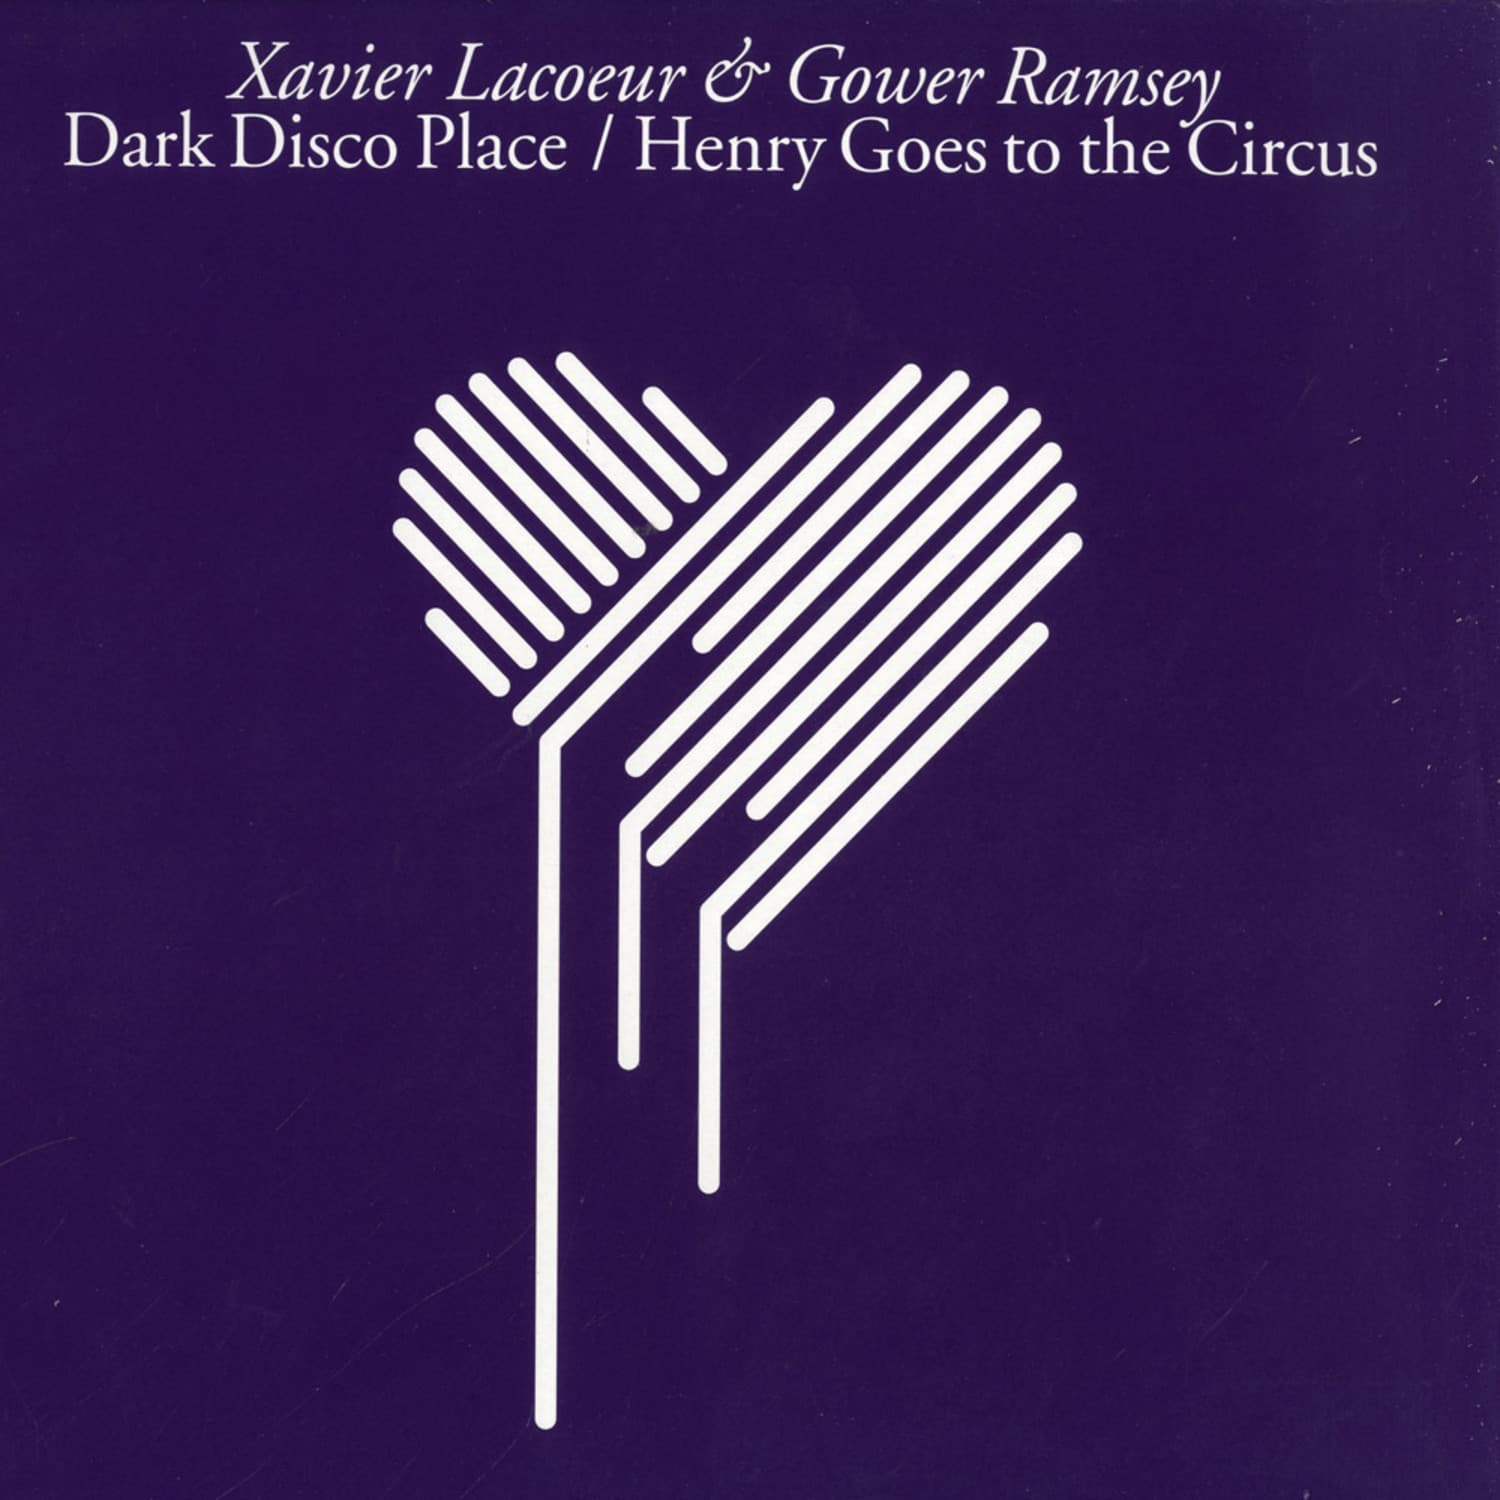 Xavier Lacoeur & Gower Ramsey - DARK DISCO PLACE / HENRY GOES TO THE CIRCUS